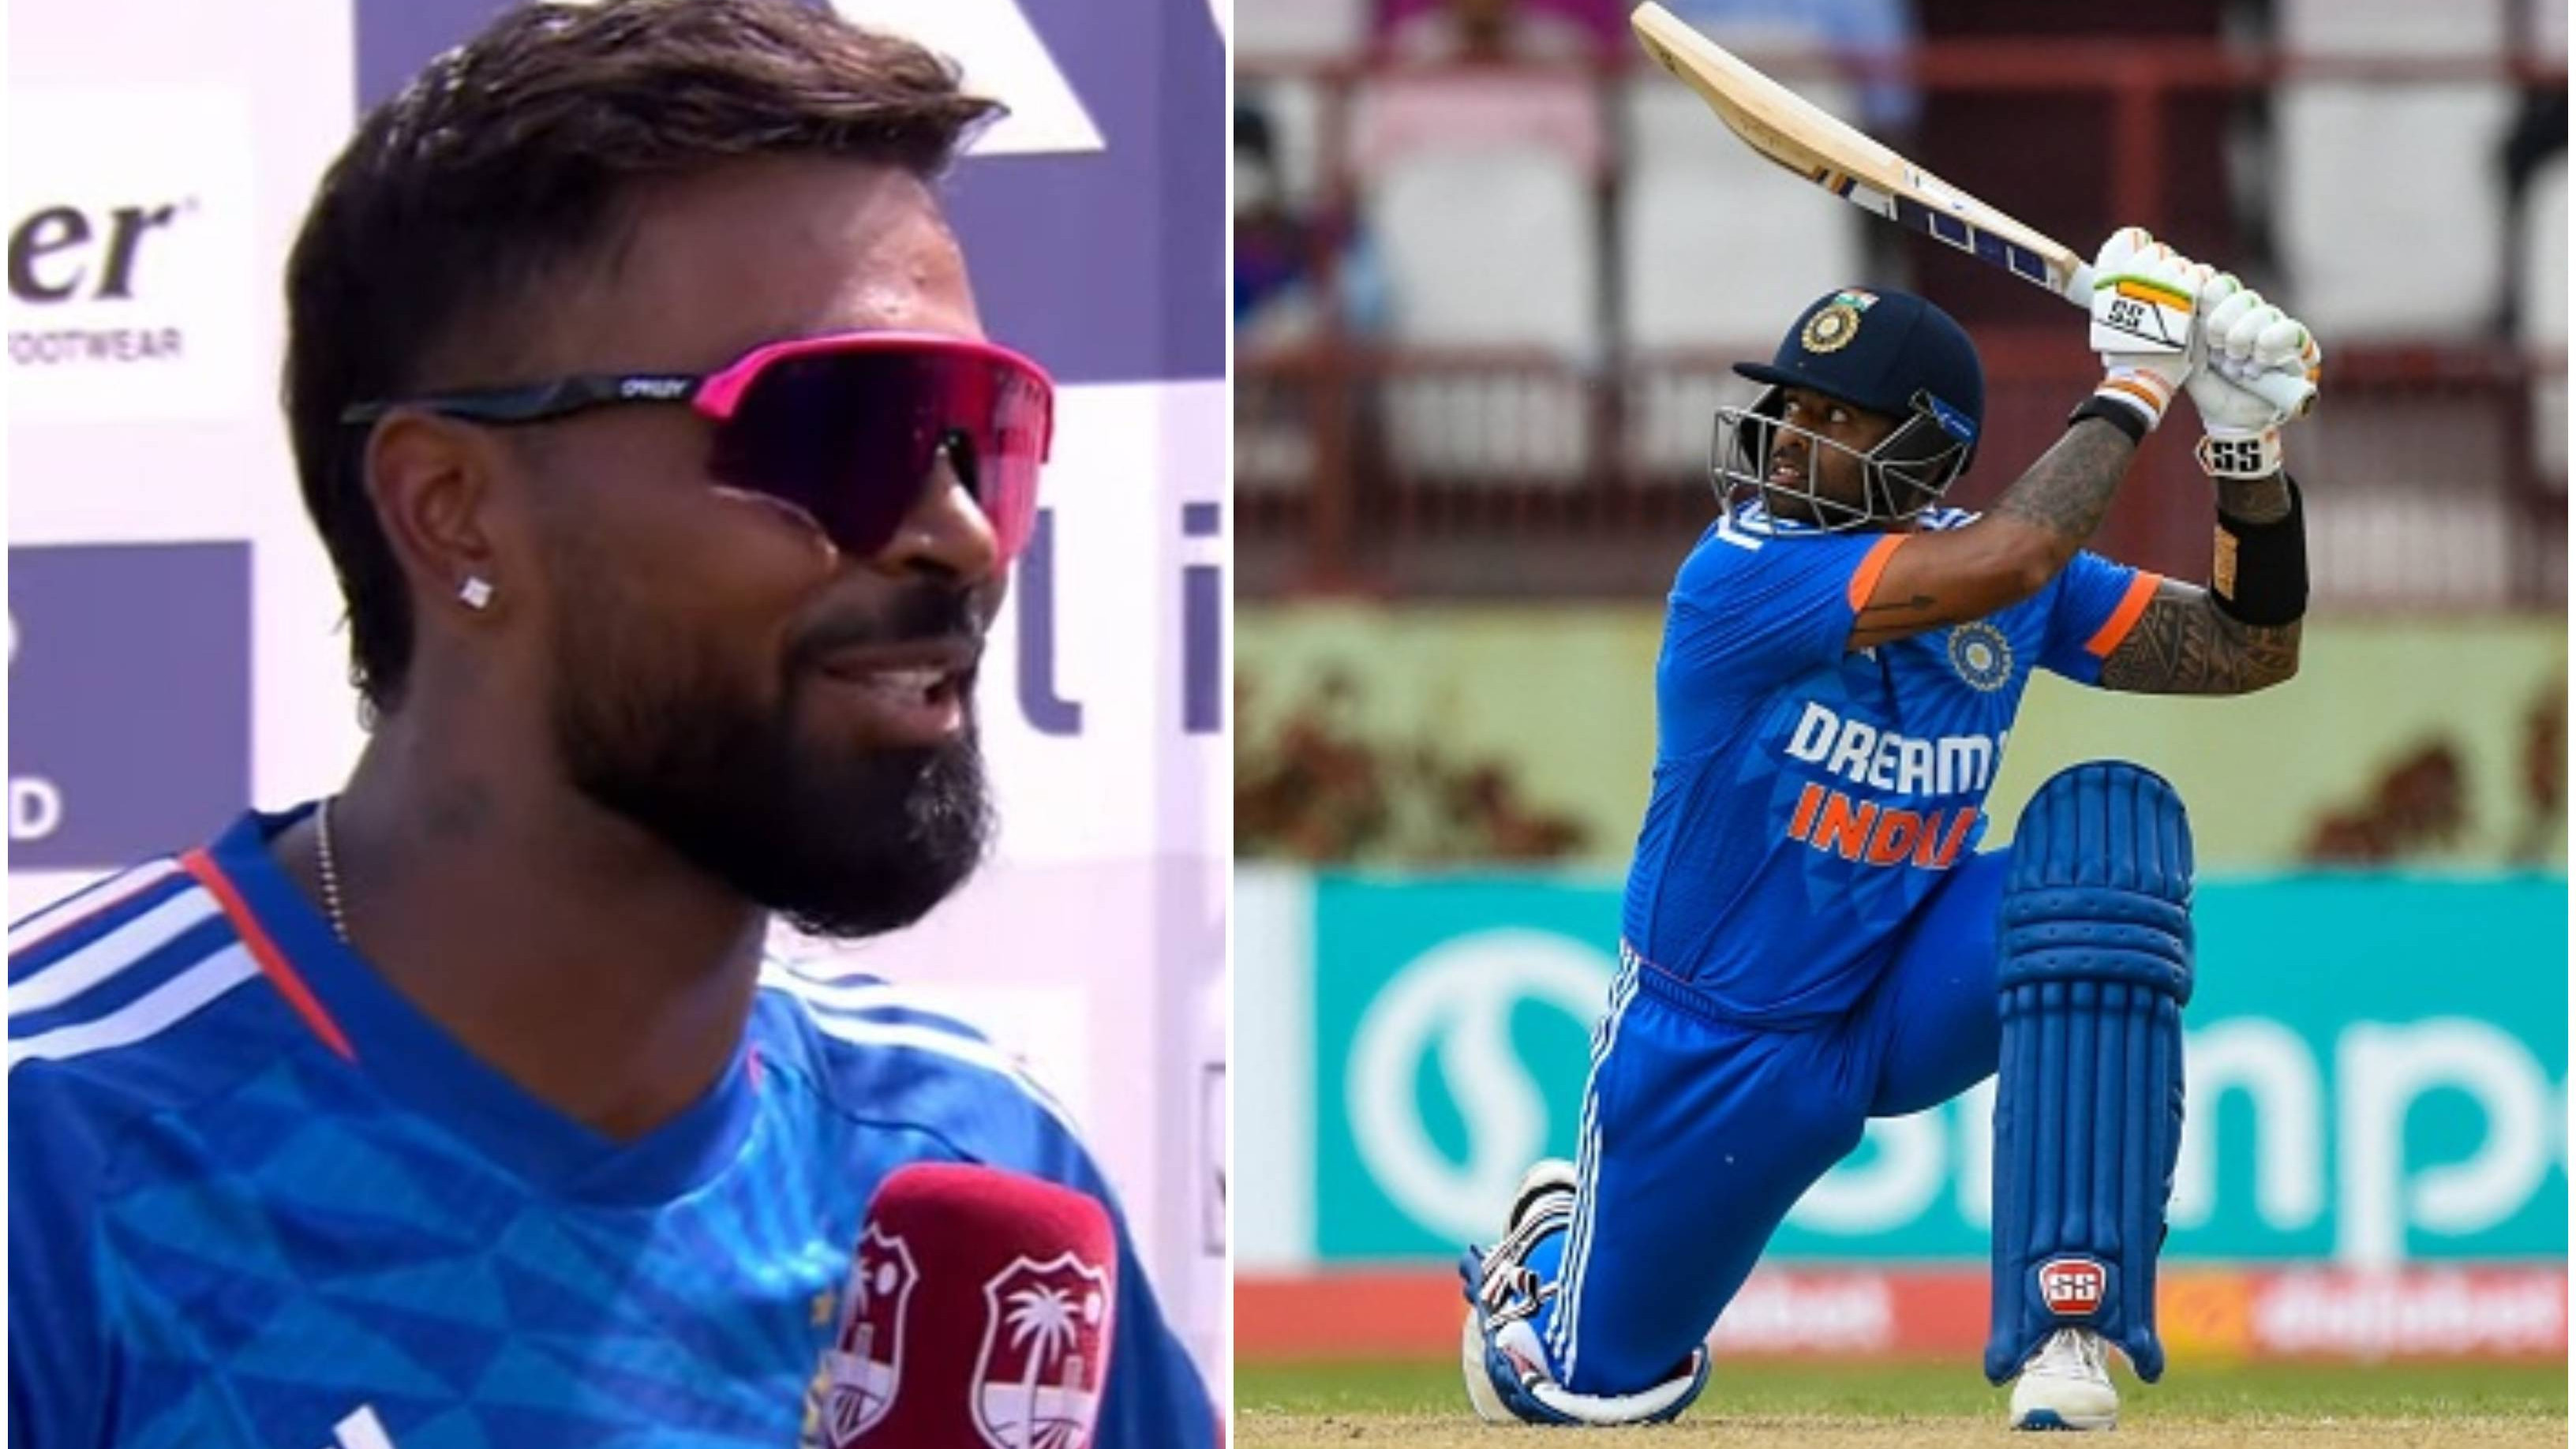 WI v IND 2023: “Good to have someone like SKY in the team,” says Hardik Pandya after India’s win in 3rd T20I